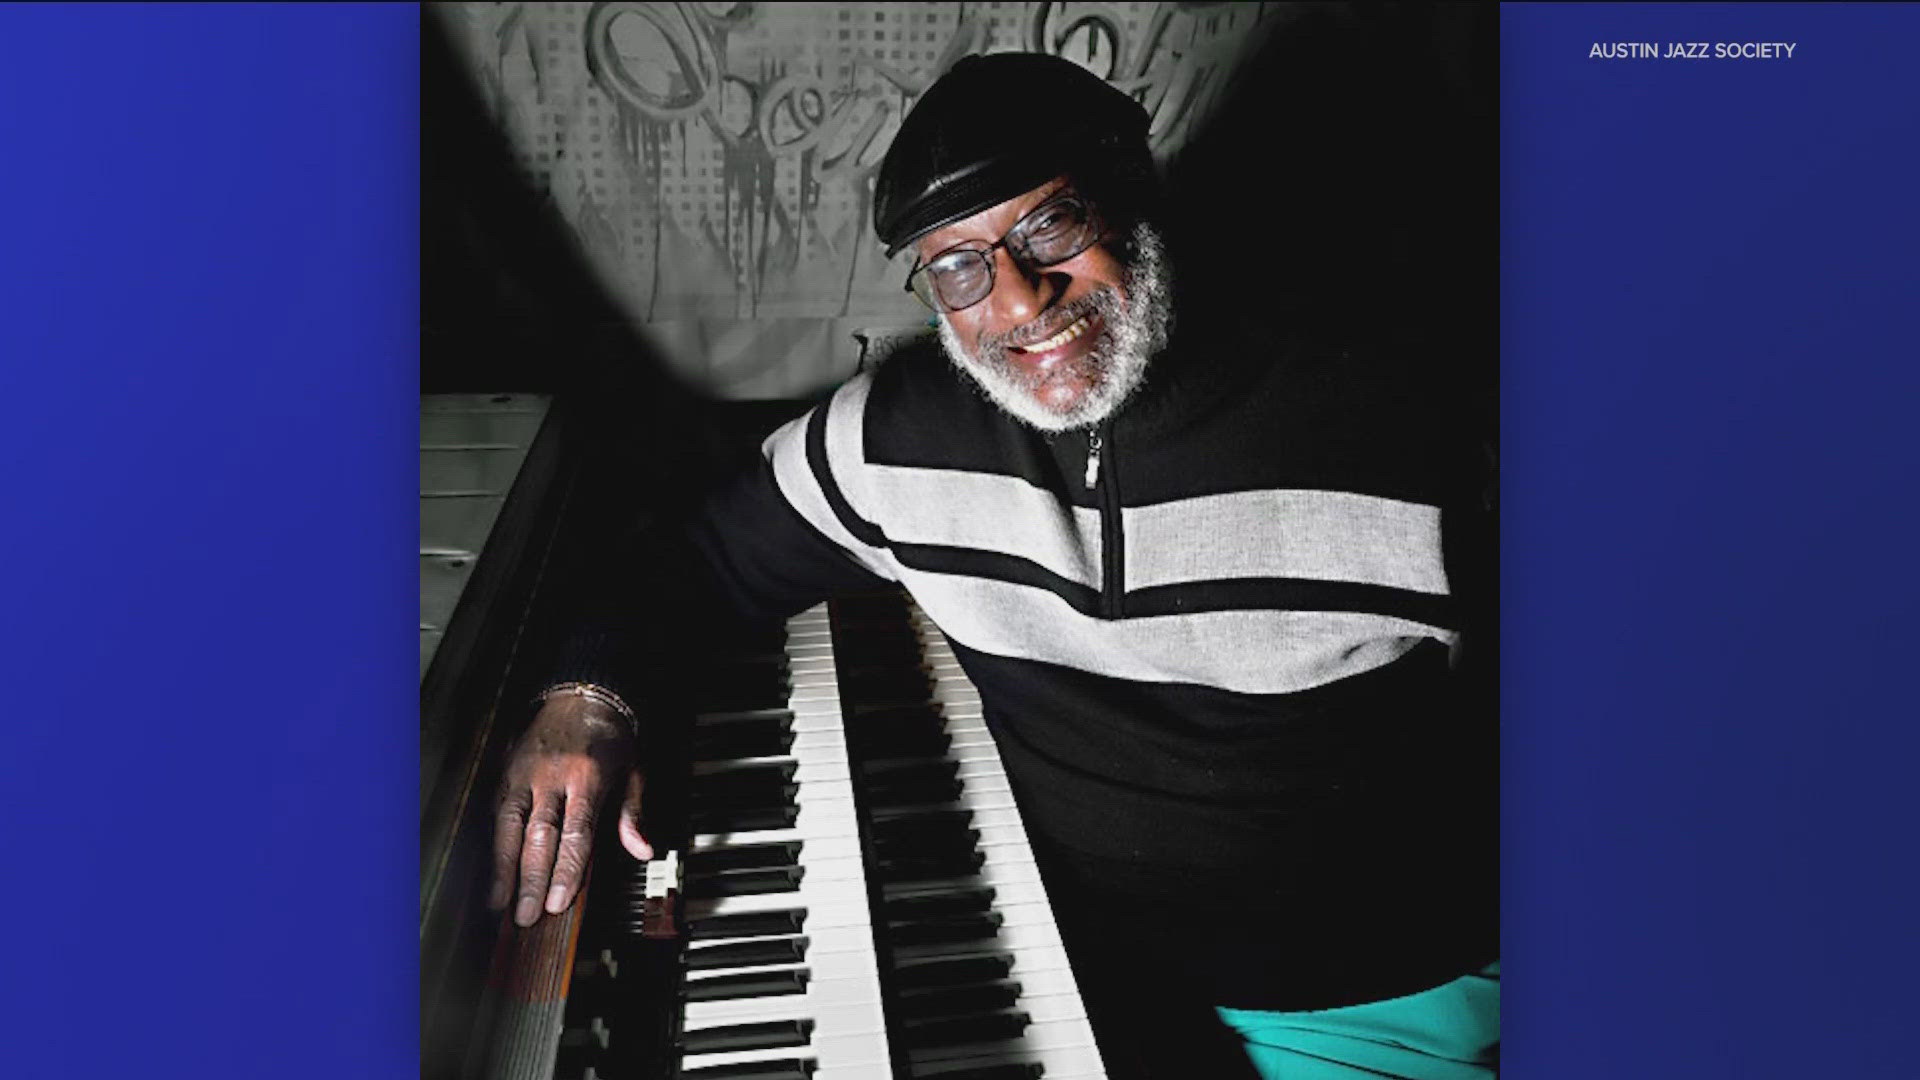 Throughout his decades-long career, Polk performed with numerous blues and jazz ensembles, even spending some time with Ray Charles' band.